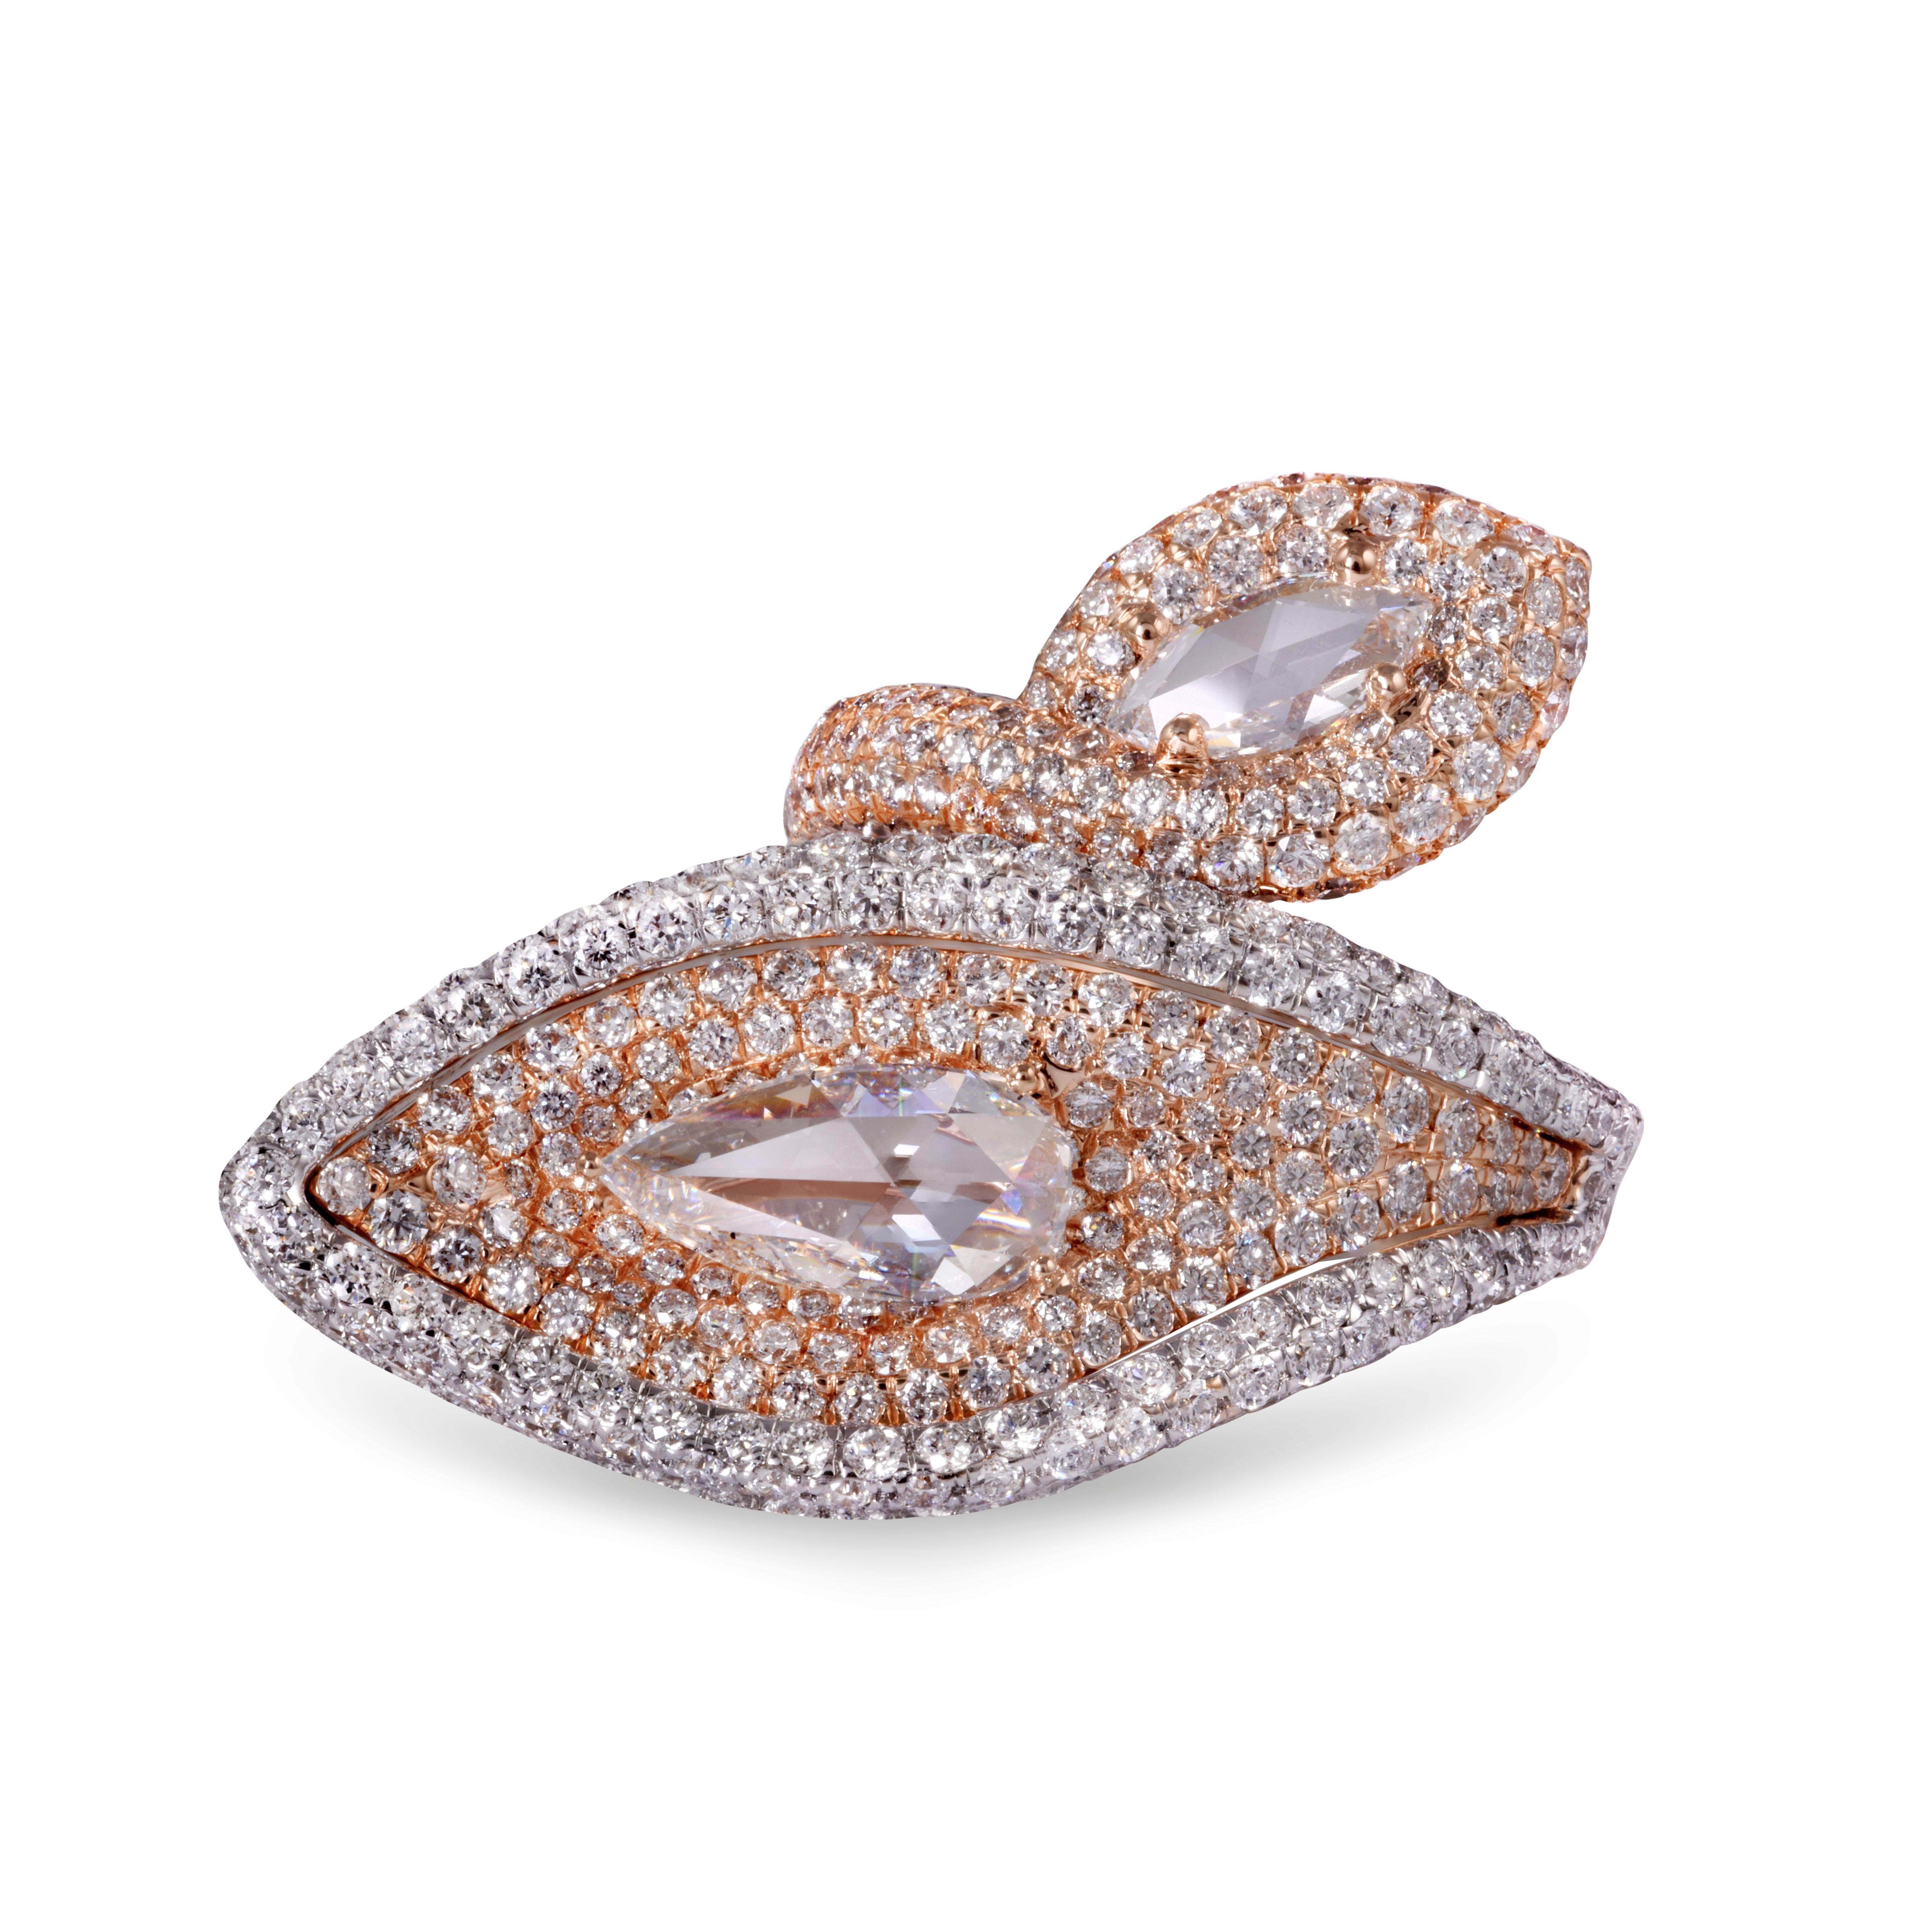 This ring takes its inspiration from morning dew on a leaf. This exclusive Rarever piece is designed with a rose-cut pear shape diamond of 0.71cts and a 0.30cts Marquise diamond surrounded by micro pave diamonds with alternating white and rose gold